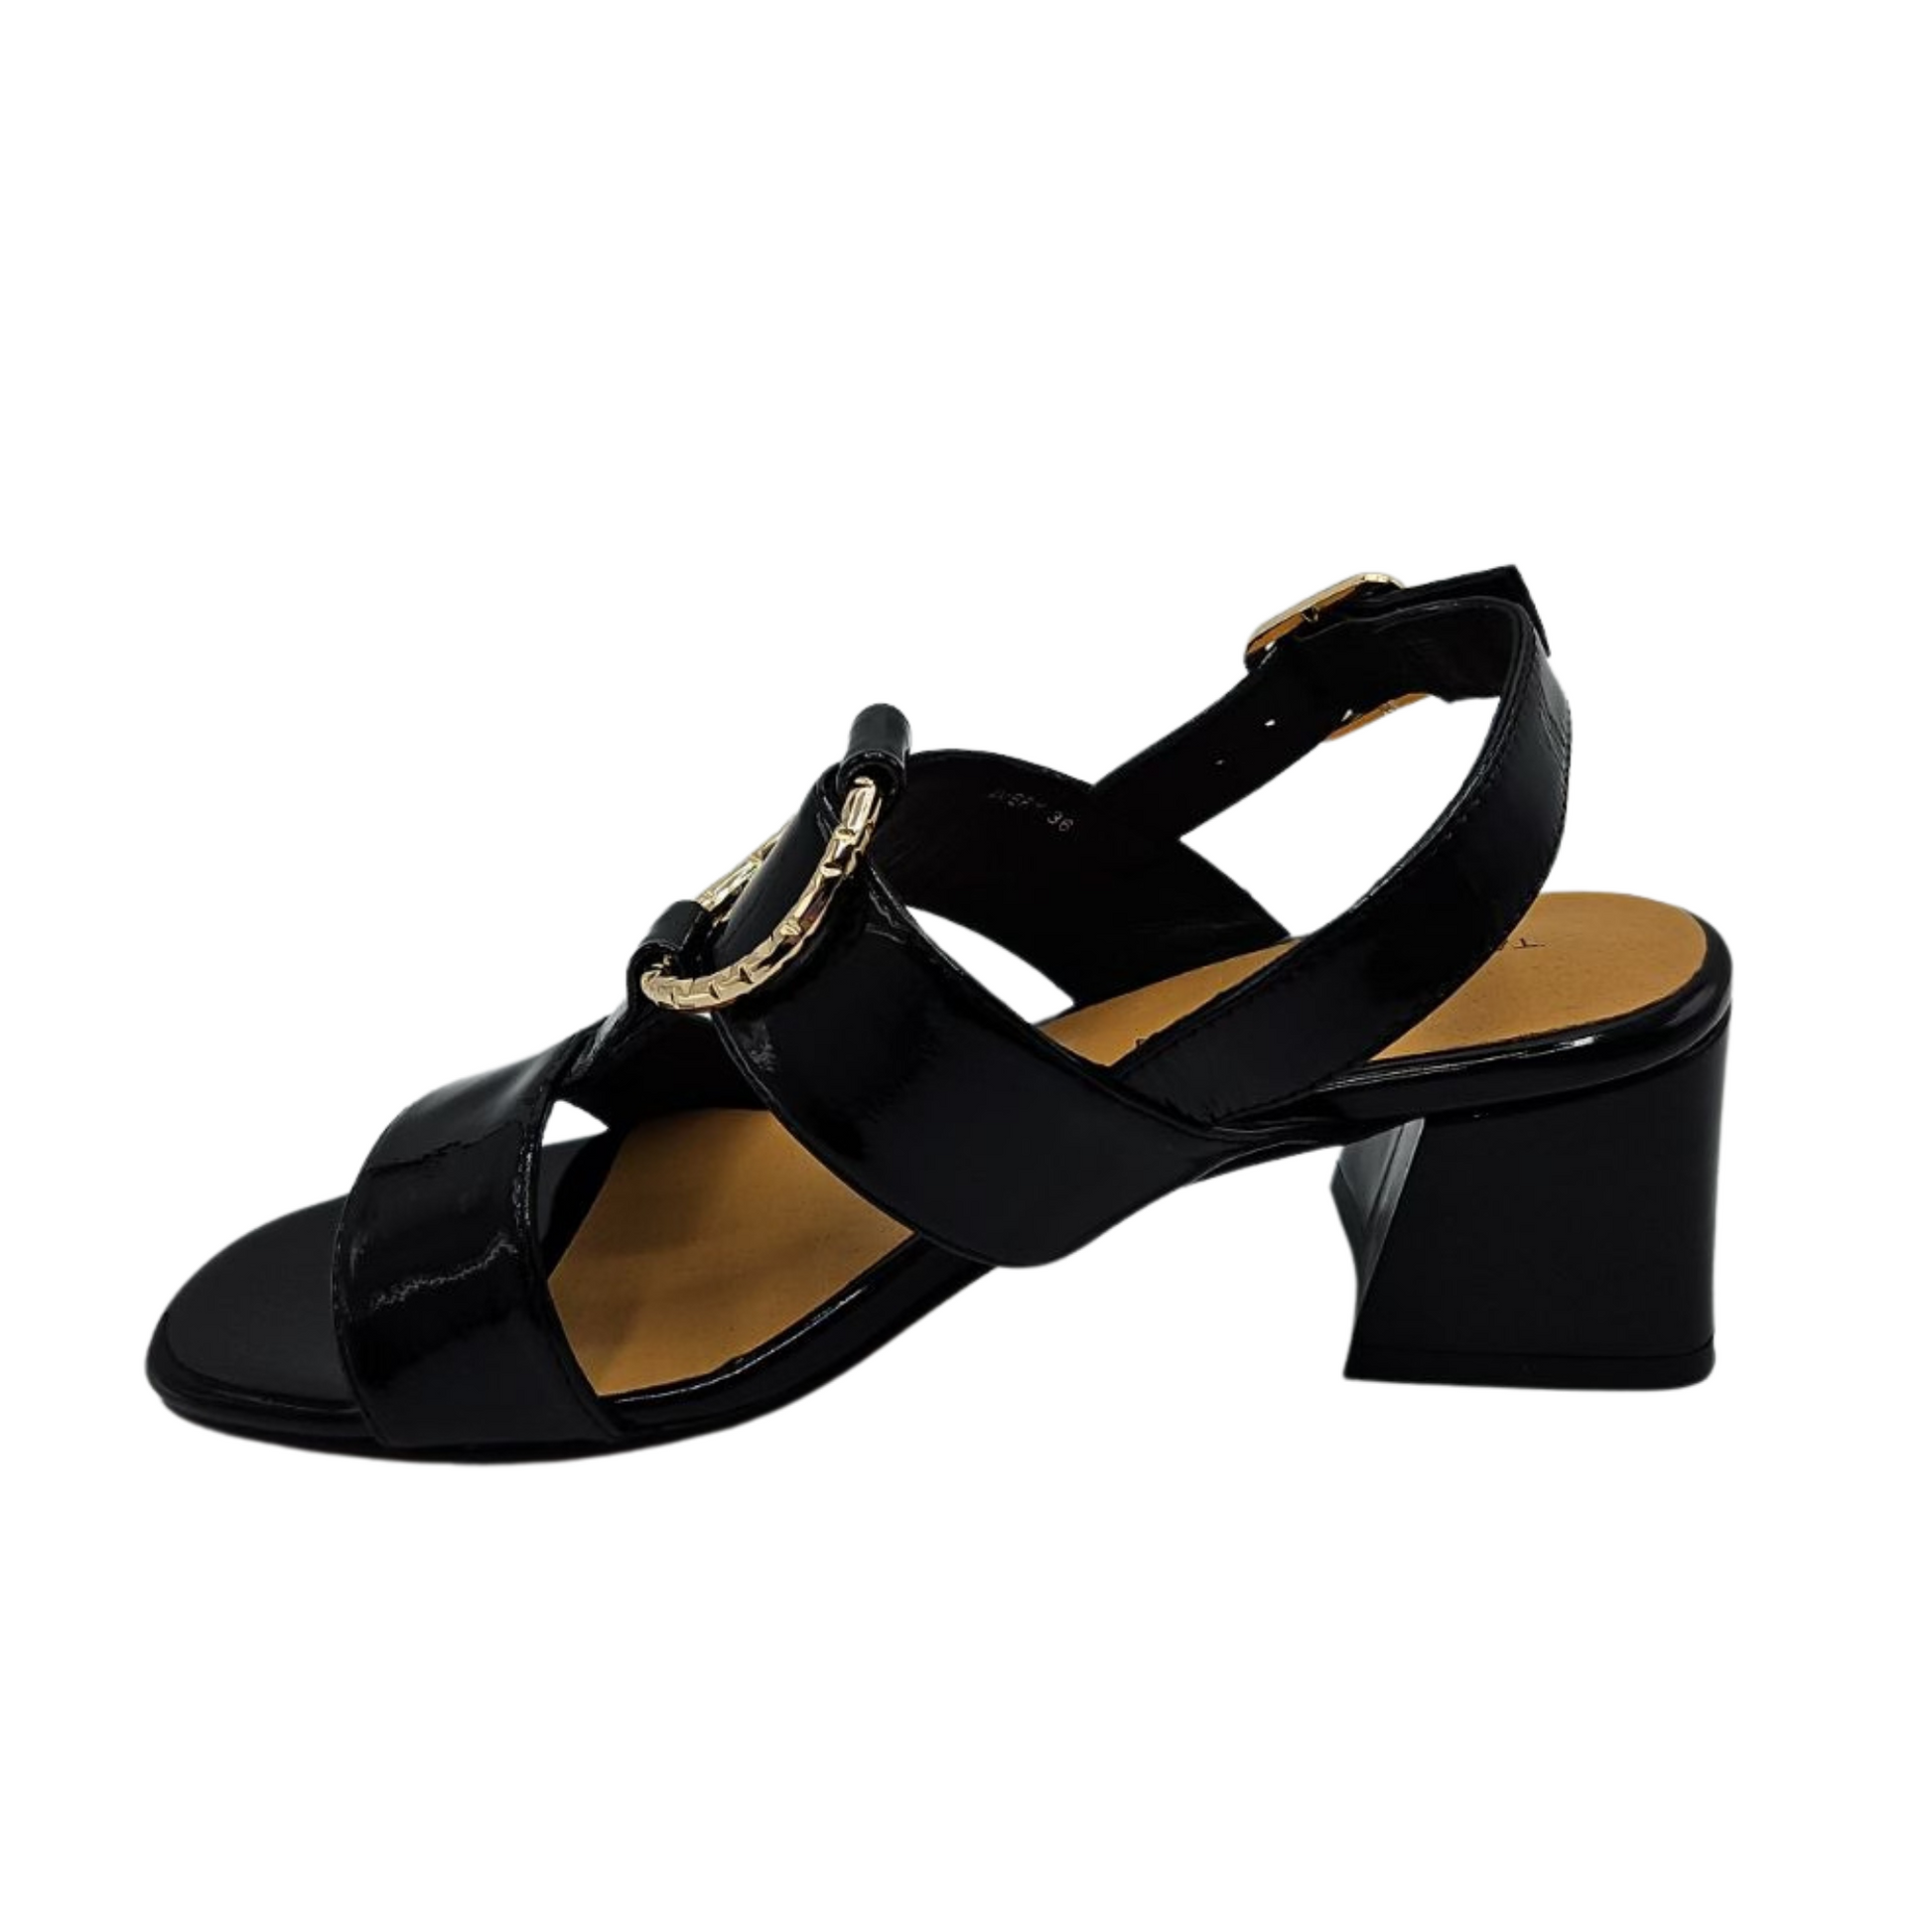 Left facing view of black patent leather sandal with wrapped block heel, adjustable sling back strap and gold details,